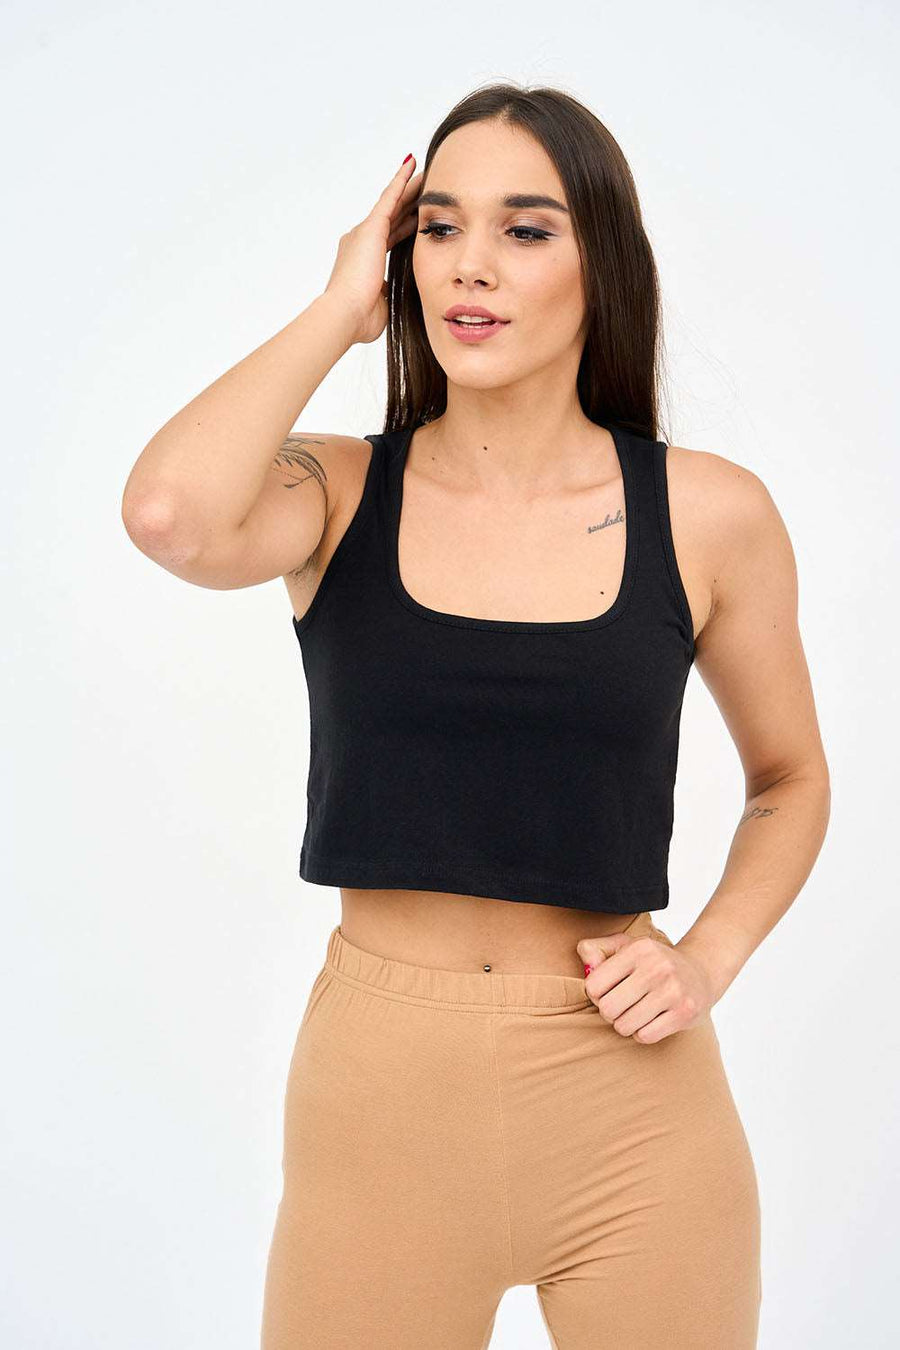 Womens Thick Strap Square Neck Crop Top